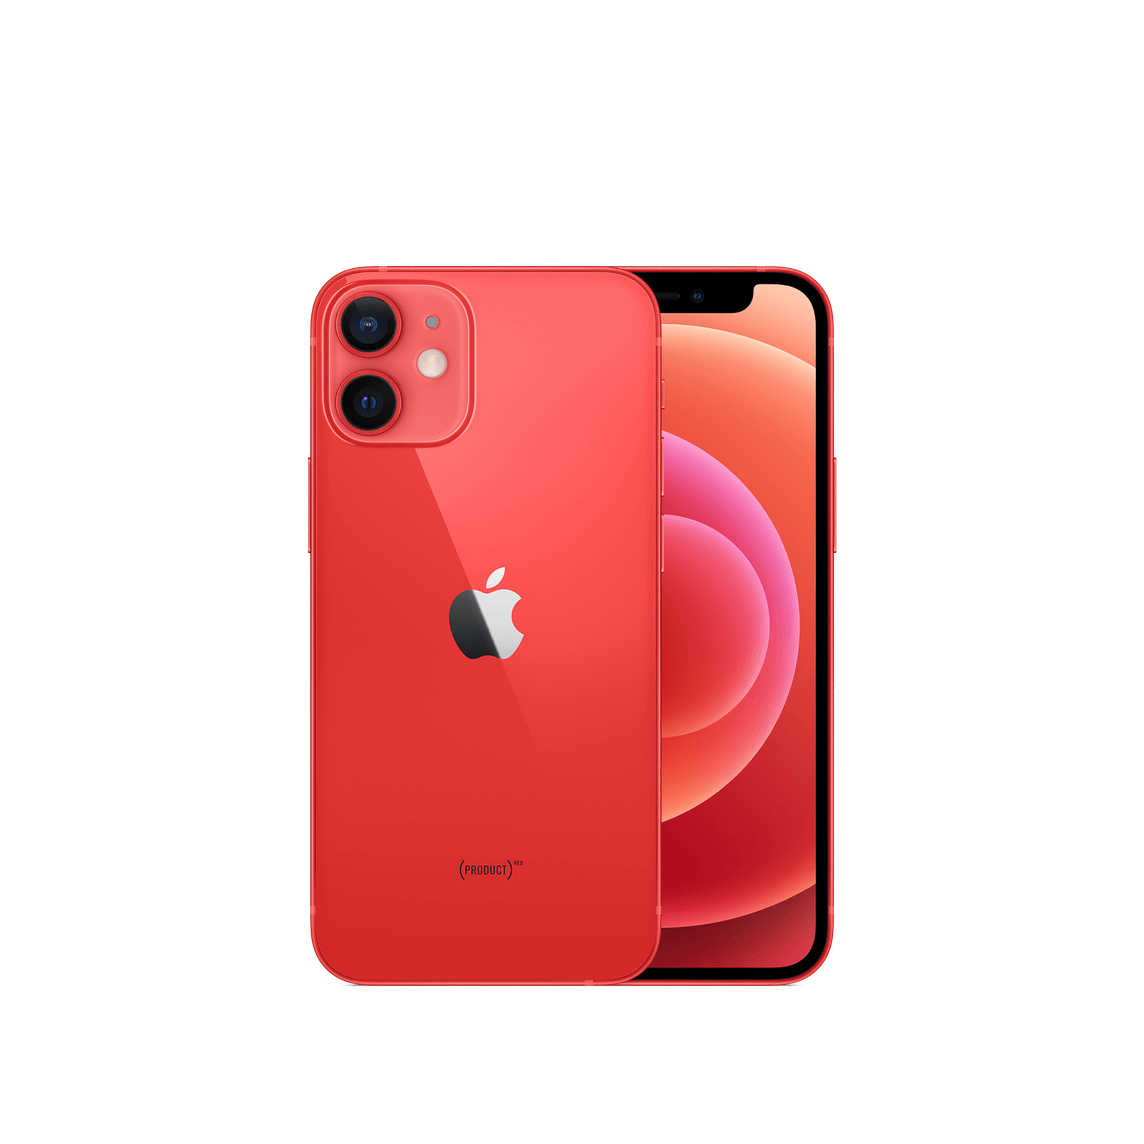 iPhone 12 mini (PRODUCT)RED